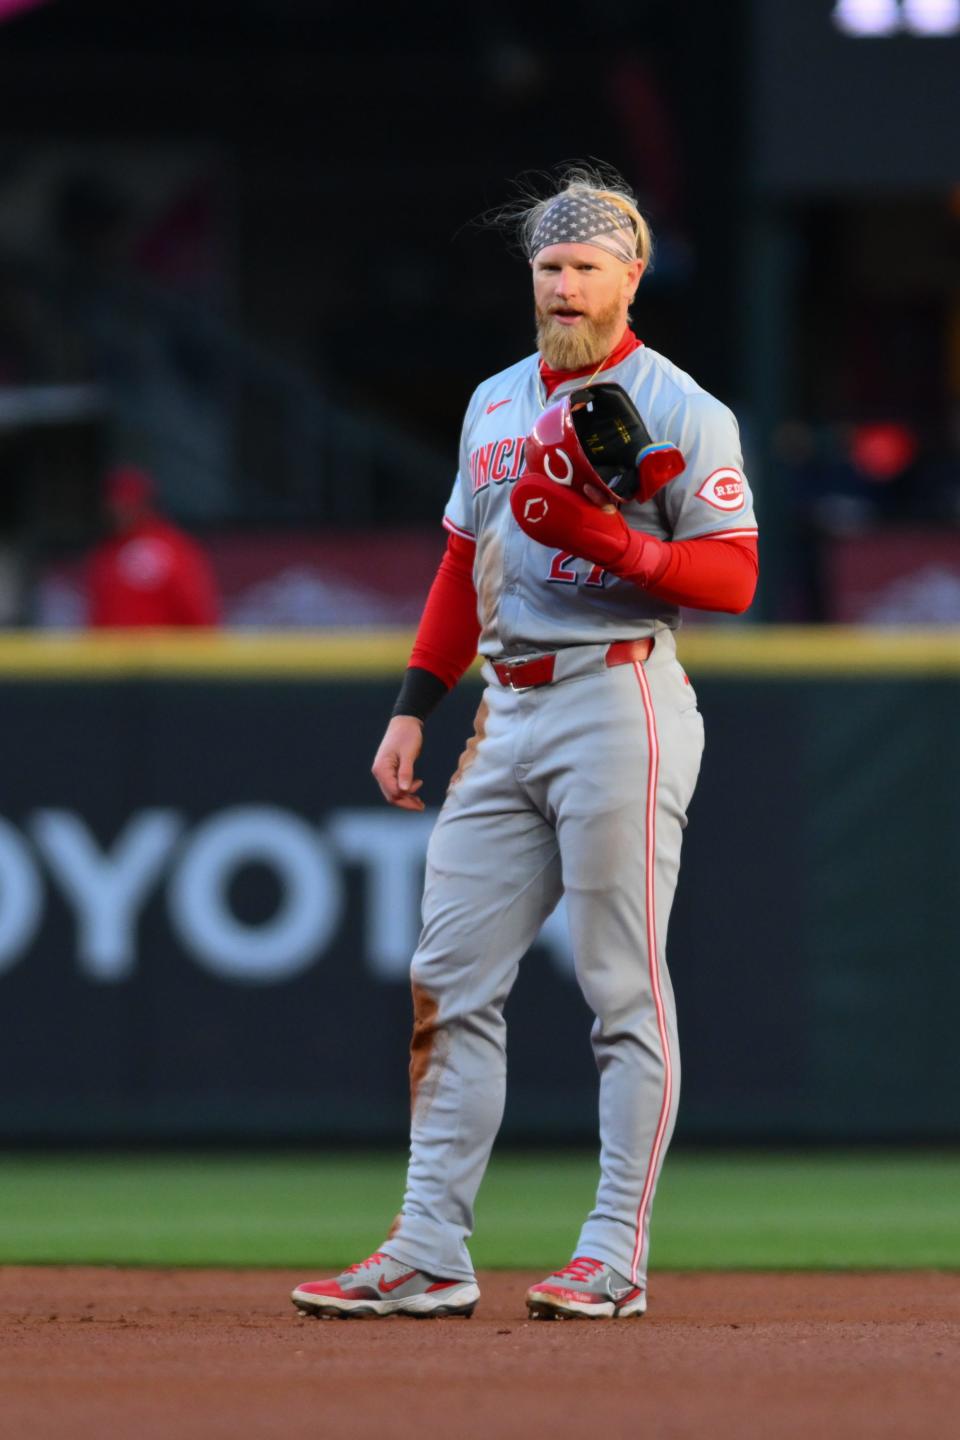 Right fielder Jake Fraley was one of three players who have missed time this week that returned to the starting  lineup against the Orioles Friday night, joining catcher Tyler Stephenson and first baseman Christian Encarnacion-Strand.